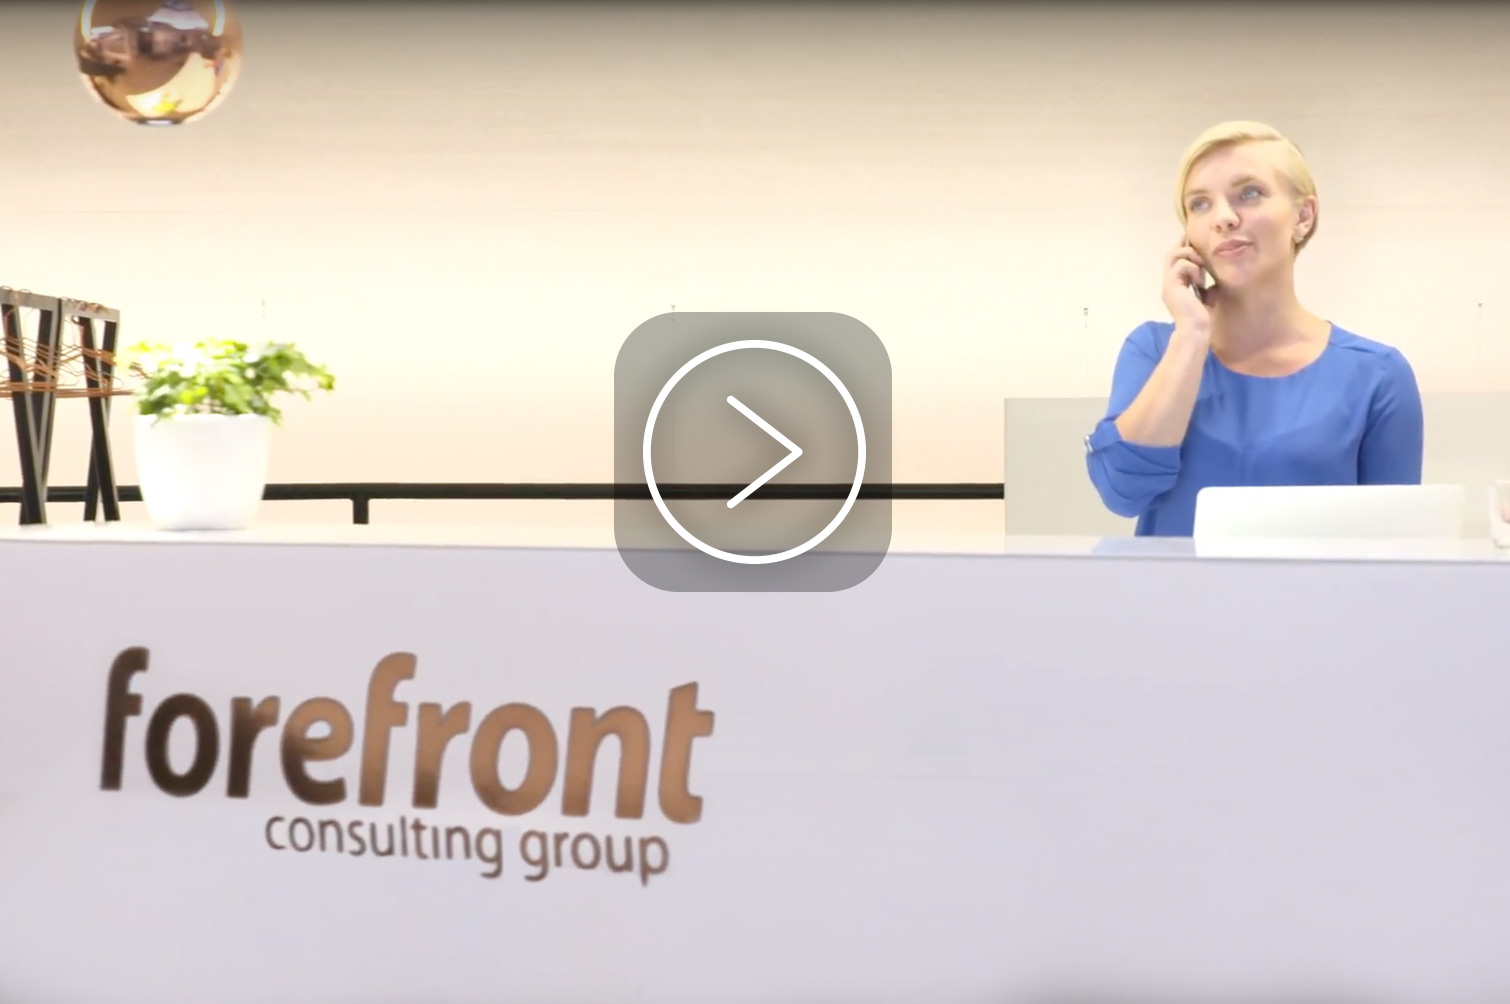 Forefront – This is Forefront